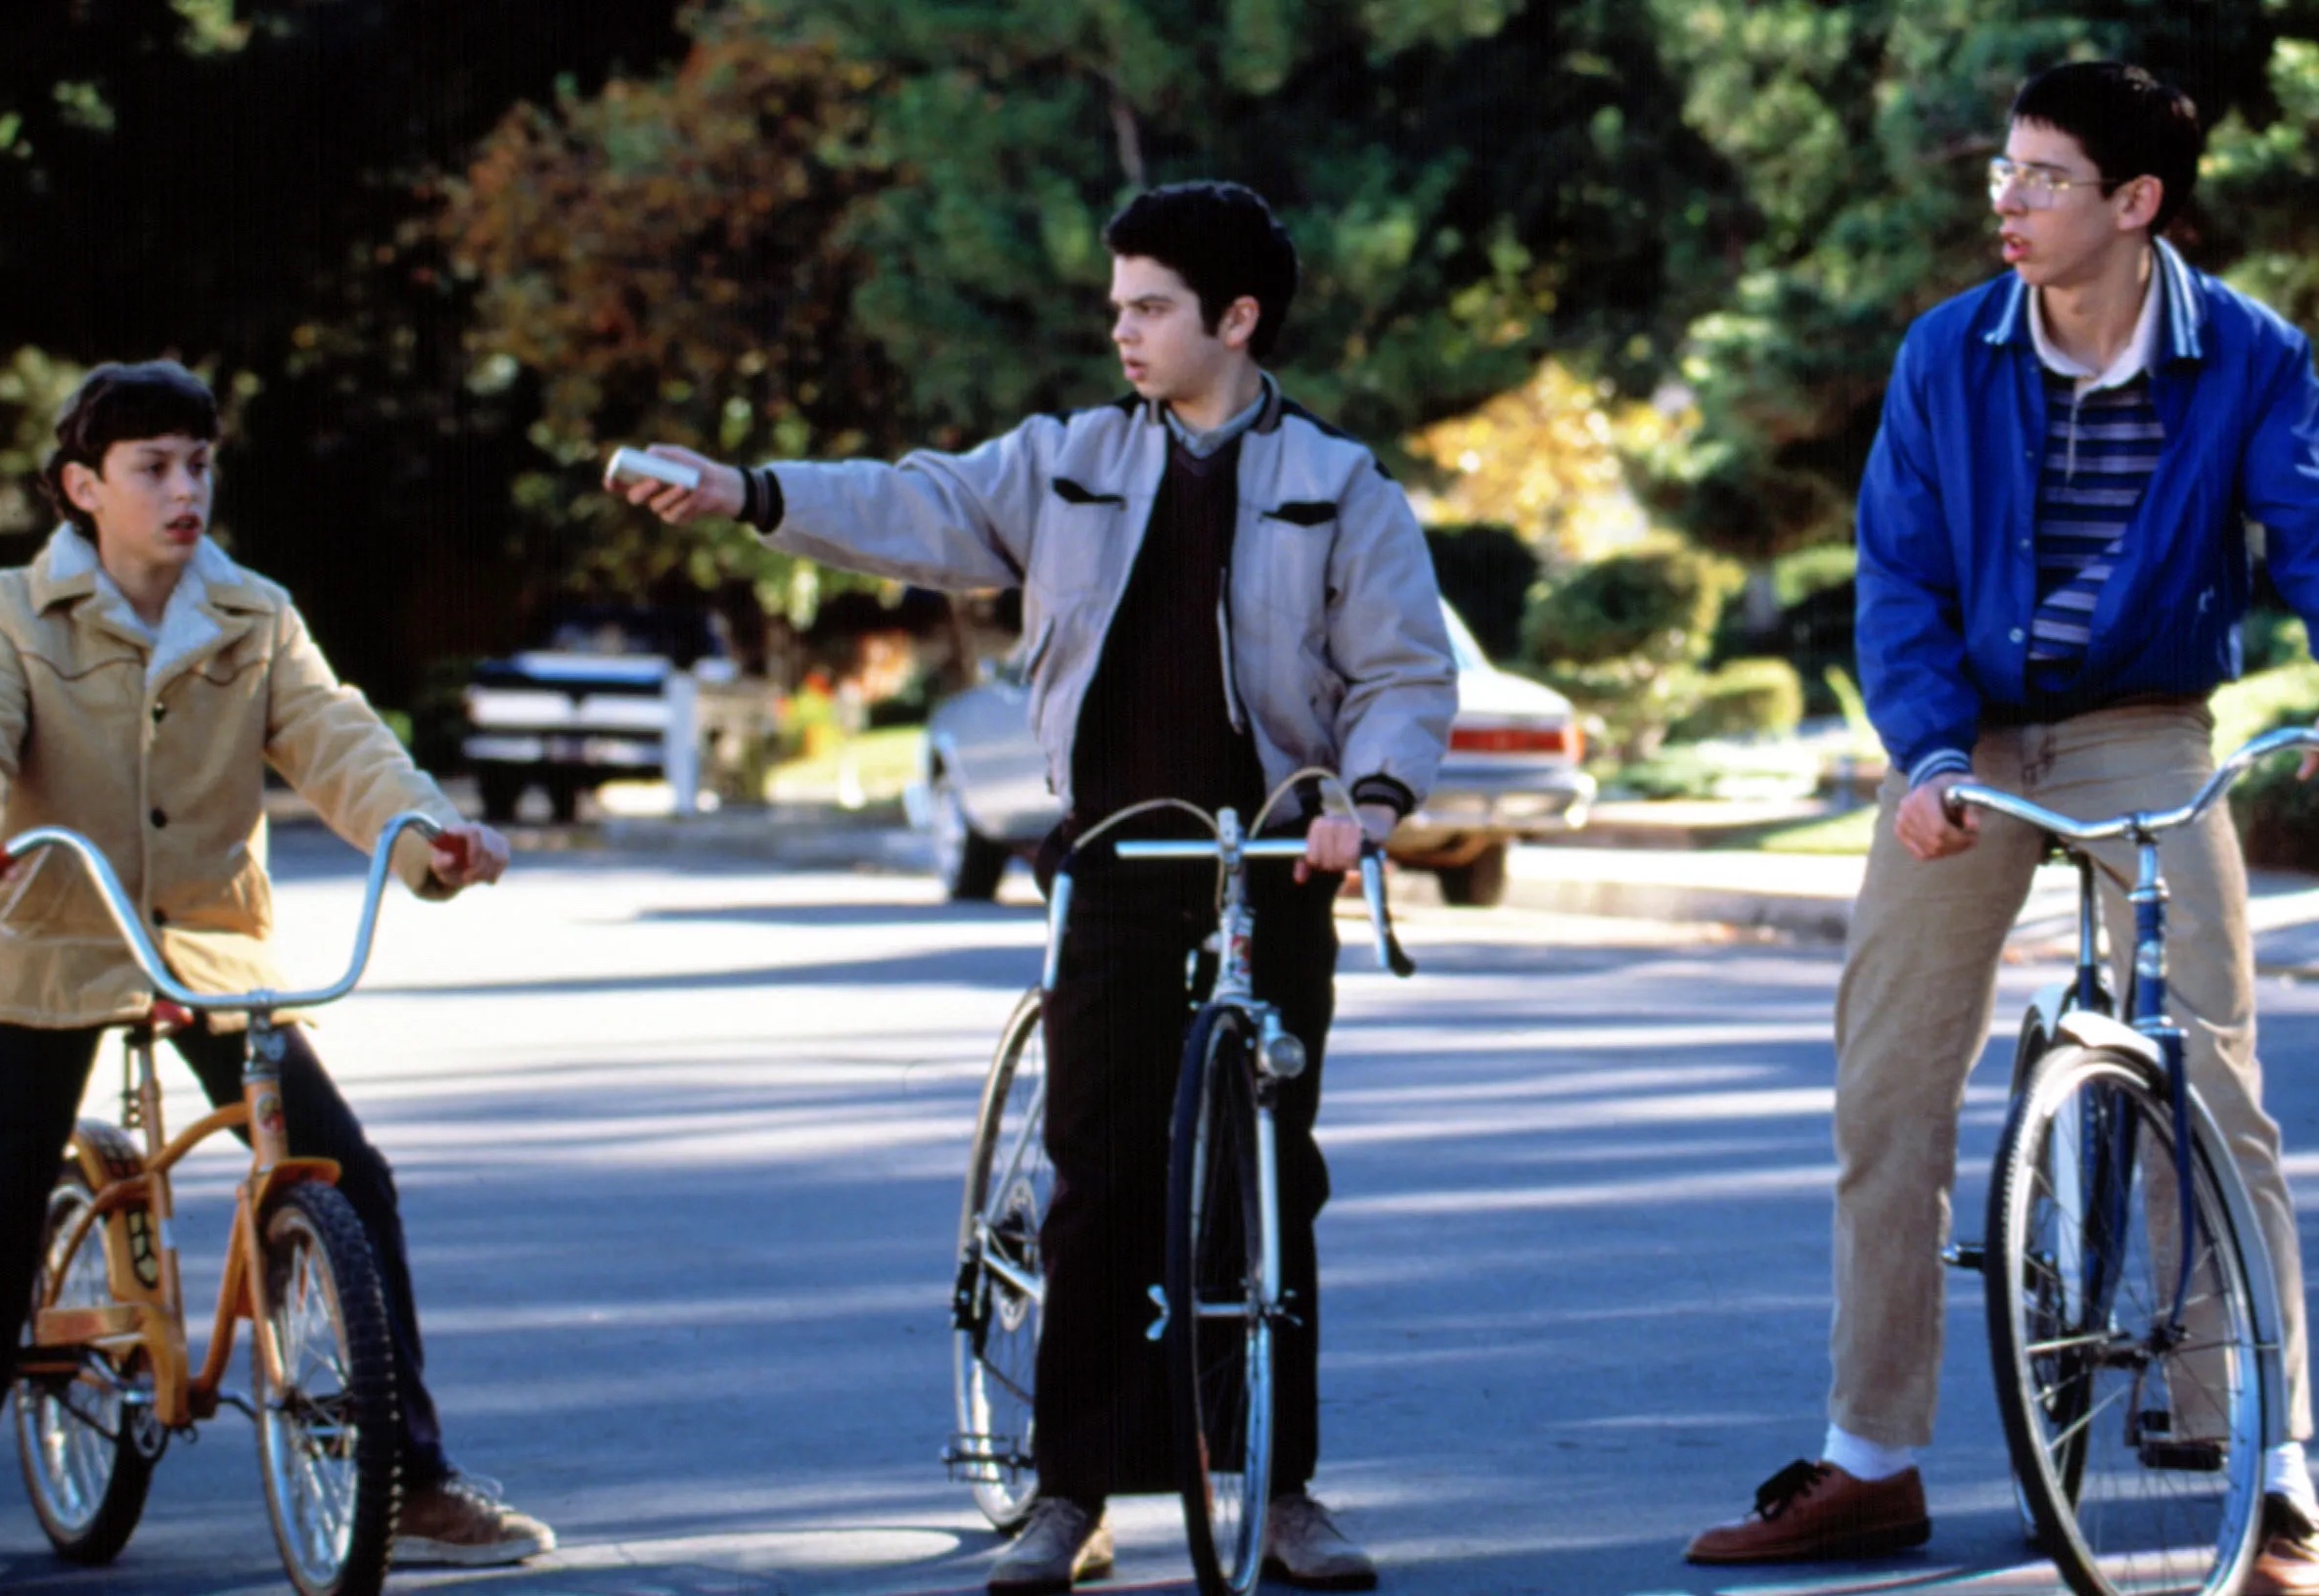 The beloved Stranger Things trio searching for their friend Will on bikes, similar to the Geeks.